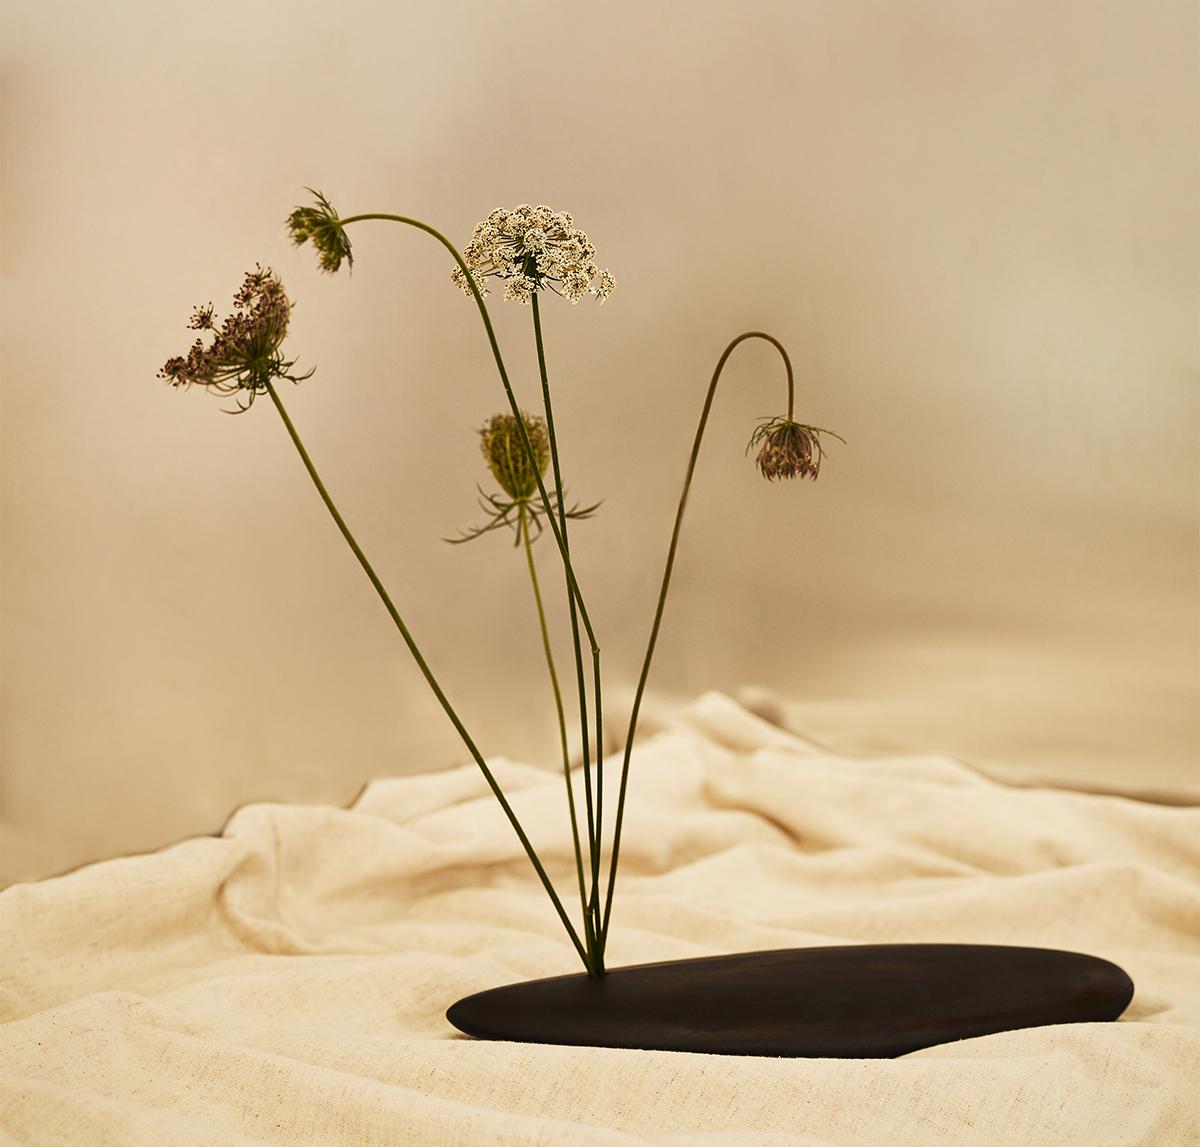 Attributed to the centuries-old Japanese art of arranging flowers, Ikebana Vase is created with İlayda Ergün, a ceramic artist based in Istanbul, yet one of our studio designers. Guided by the philosophy behind Ikebana which emphasizes simplicity,